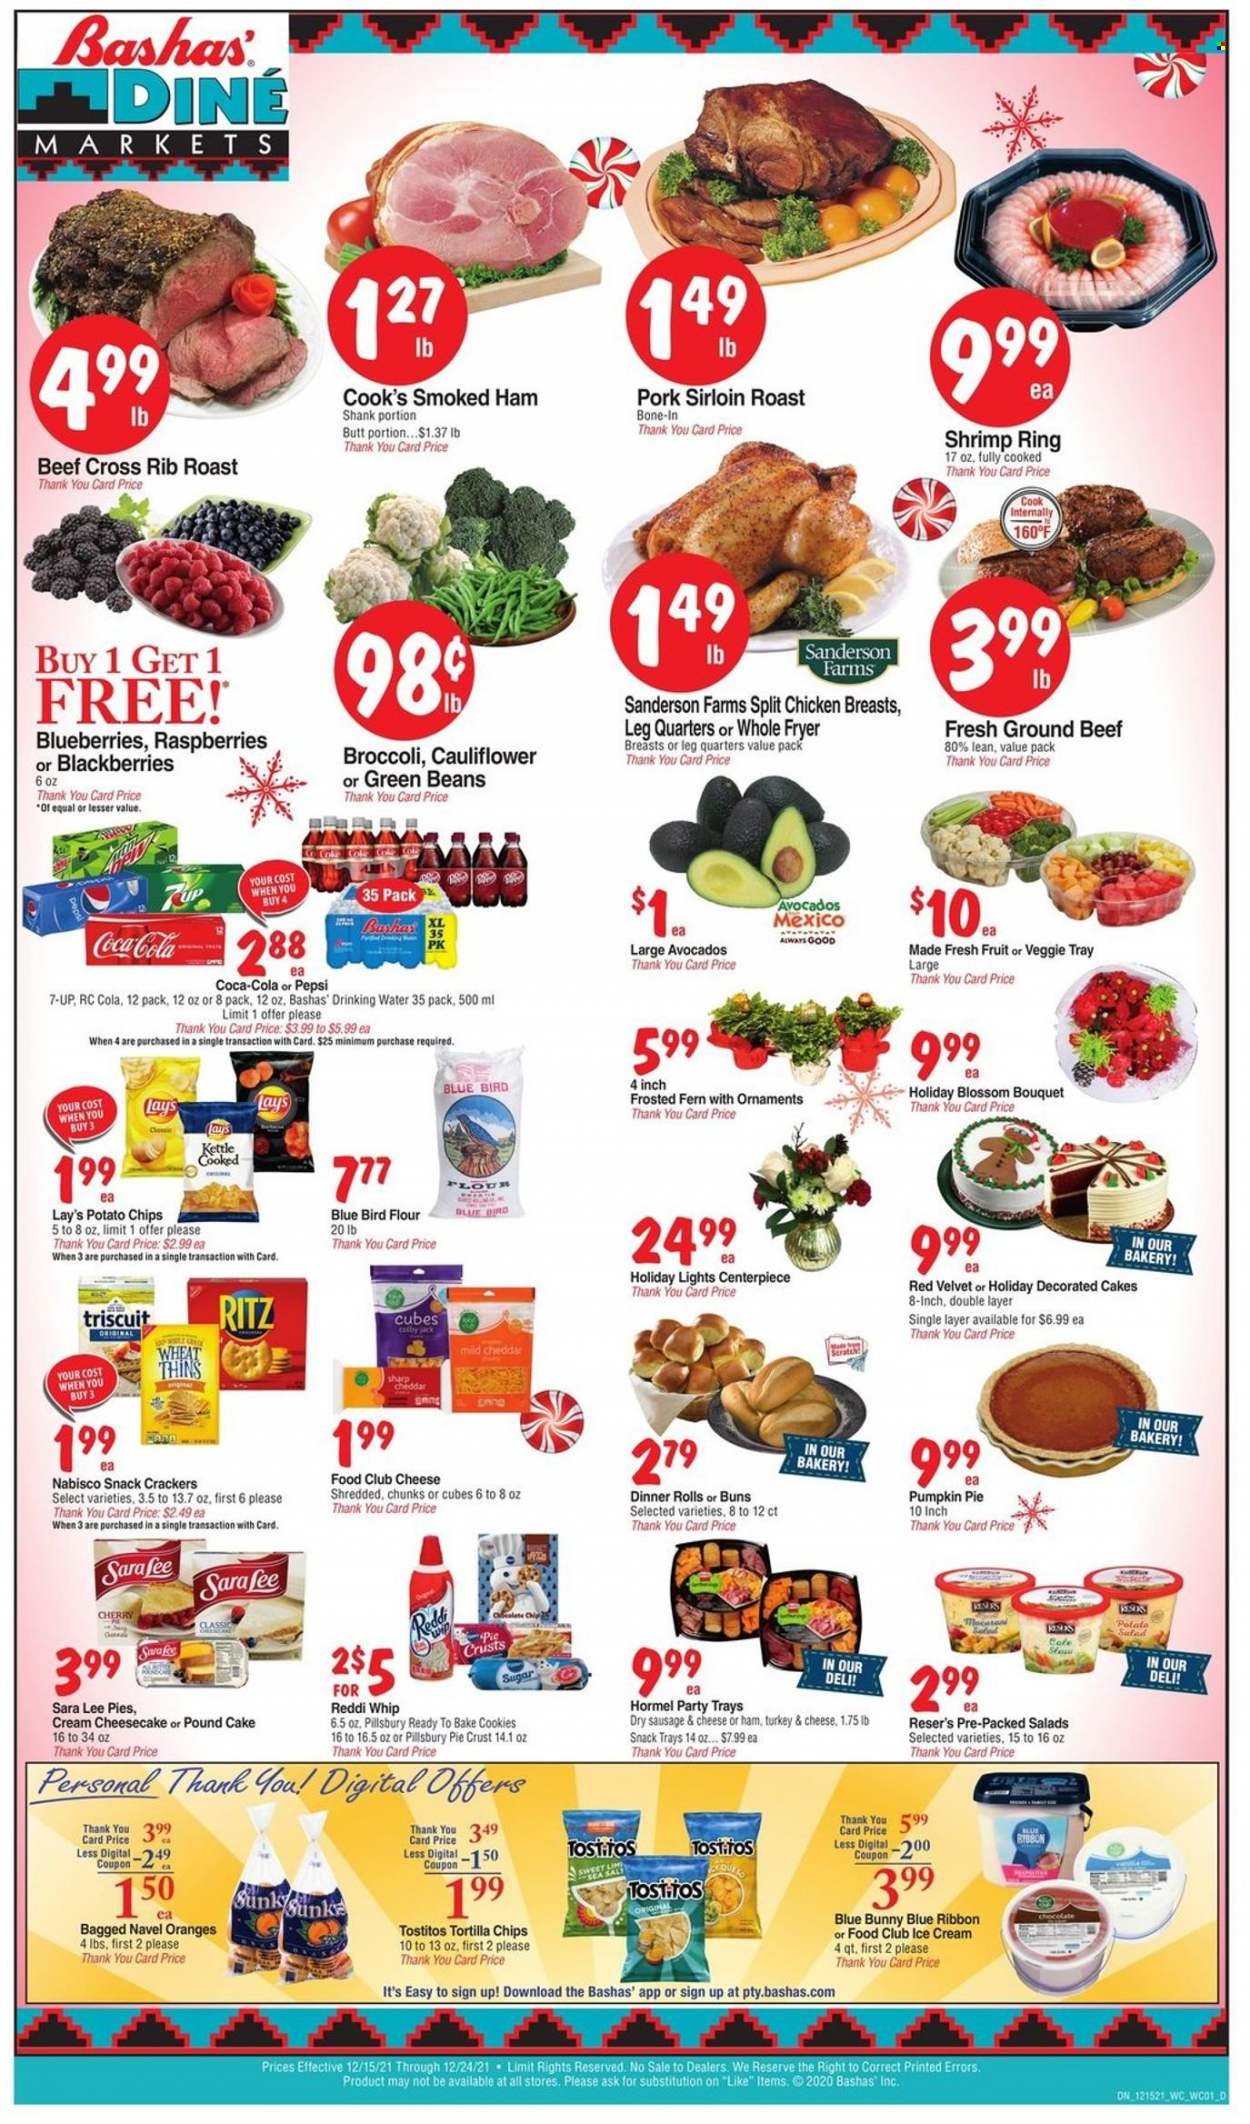 thumbnail - Bashas' Diné Markets Flyer - 12/15/2021 - 12/24/2021 - Sales products - cake, dinner rolls, buns, Sara Lee, pound cake, beans, broccoli, green beans, pumpkin, avocado, blackberries, blueberries, cherries, oranges, shrimps, Pillsbury, Hormel, ham shank, smoked ham, Cook's, sausage, Colby cheese, mild cheddar, Blossom, ice cream, cookies, snack, crackers, RITZ, tortilla chips, potato chips, chips, Lay’s, Thins, Tostitos, sugar, pie crust, Coca-Cola, Pepsi, 7UP, chicken breasts, beef meat, ground beef, pork loin, bouquet, navel oranges. Page 1.